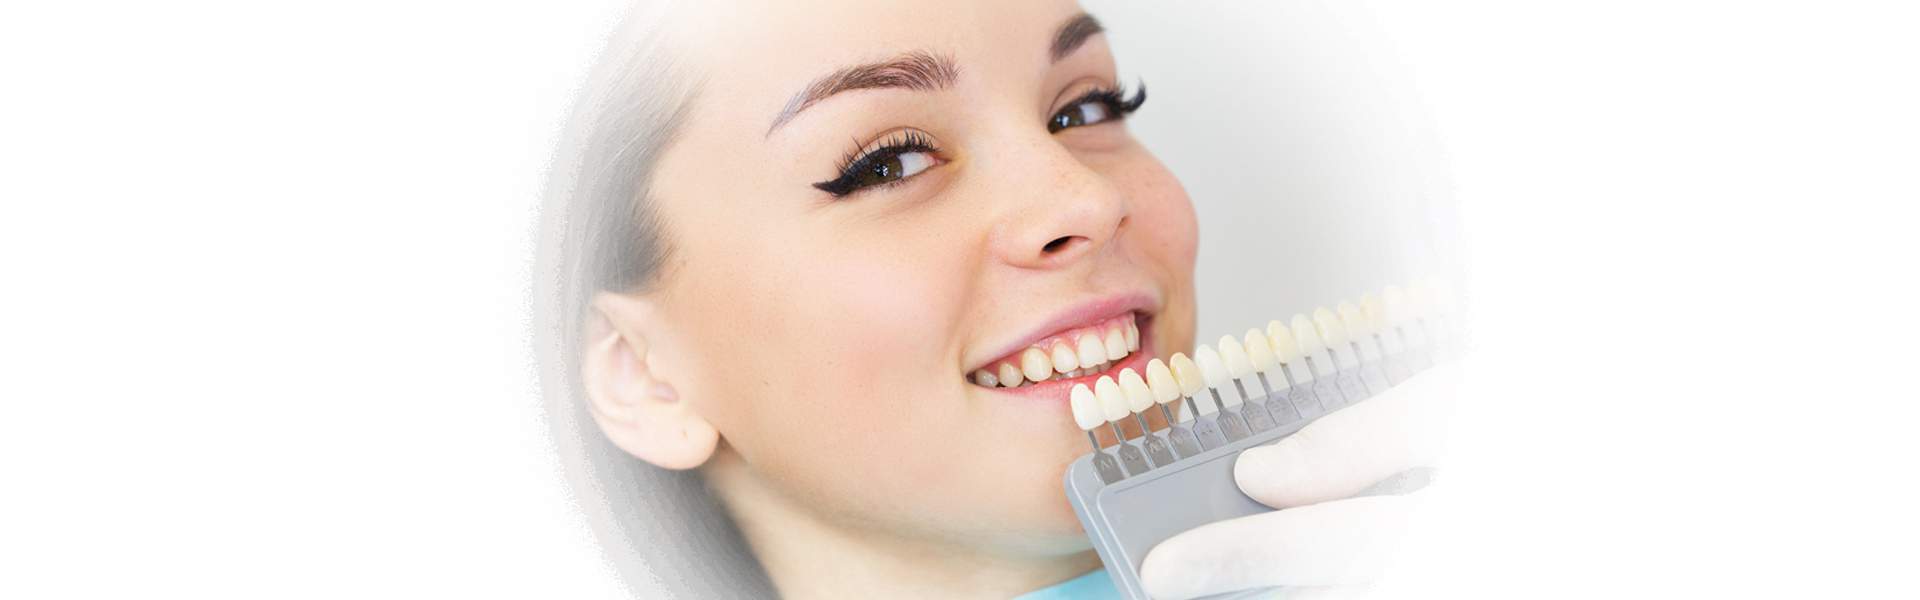 Cosmetic Dentist Answers Your Porcelain Veneers Faqs!